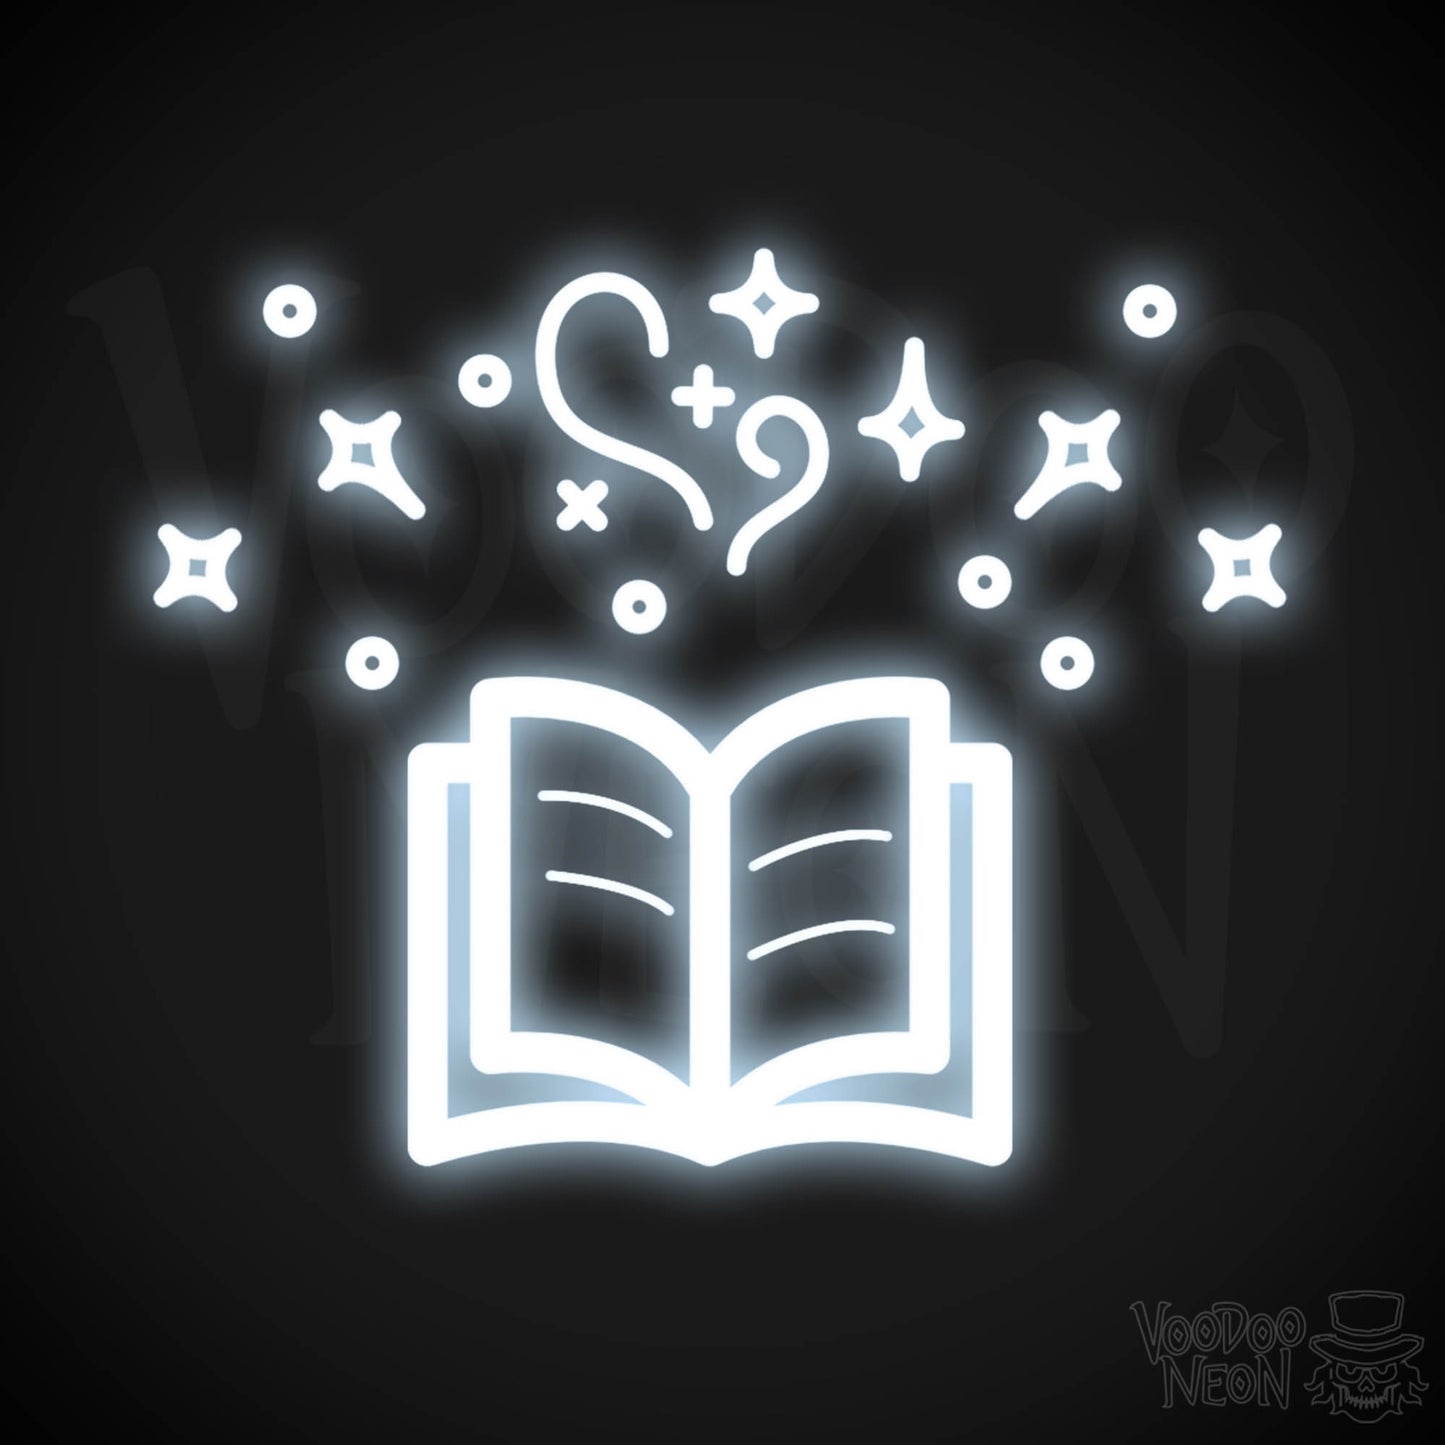 Neon Spell Book - Spell Book Neon Sign - LED Neon Wall Art - Color Cool White